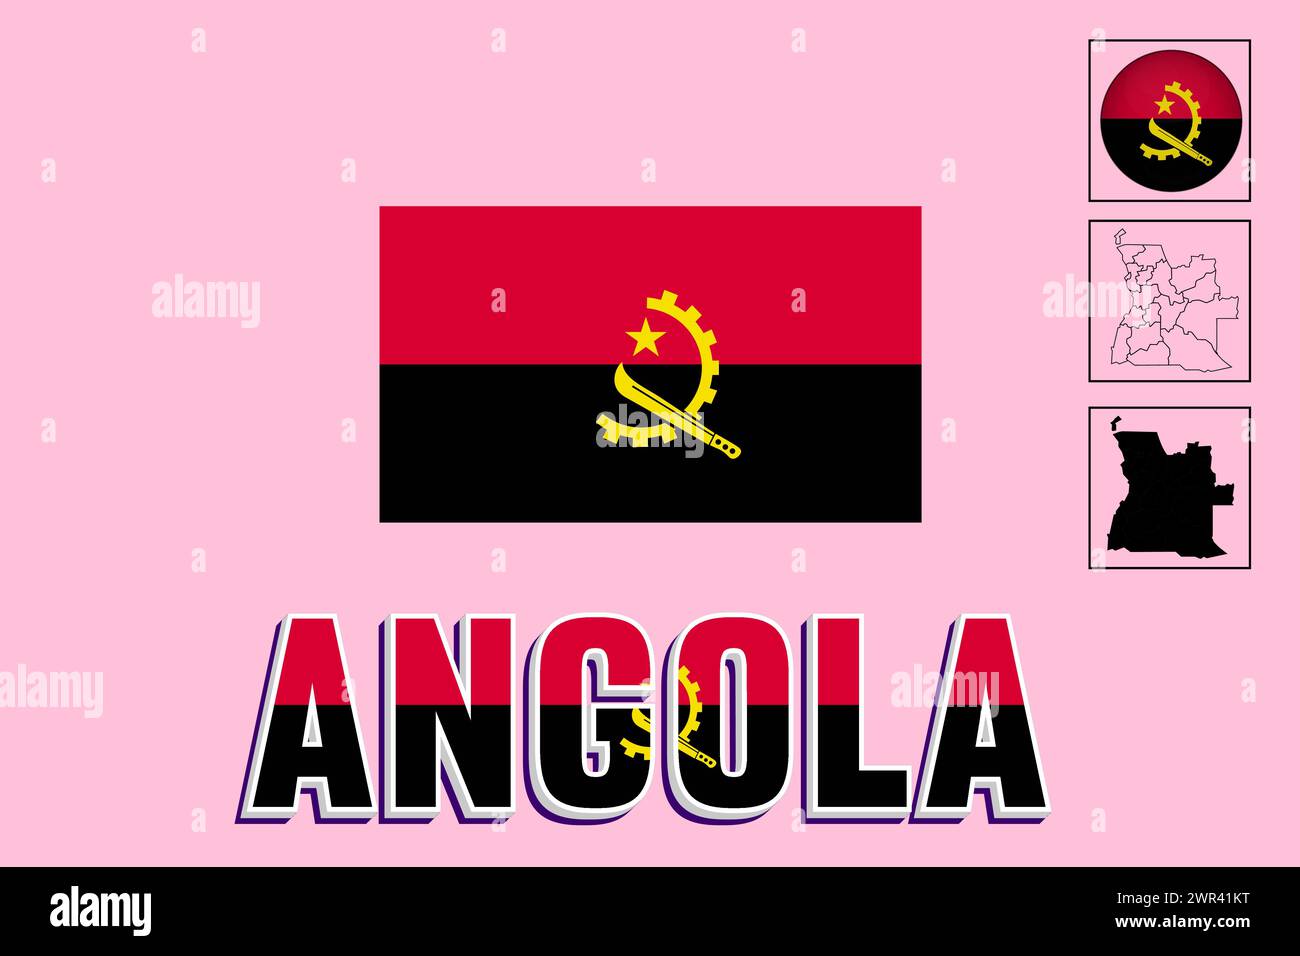 Angola flag and map in vector illustration Stock Vector